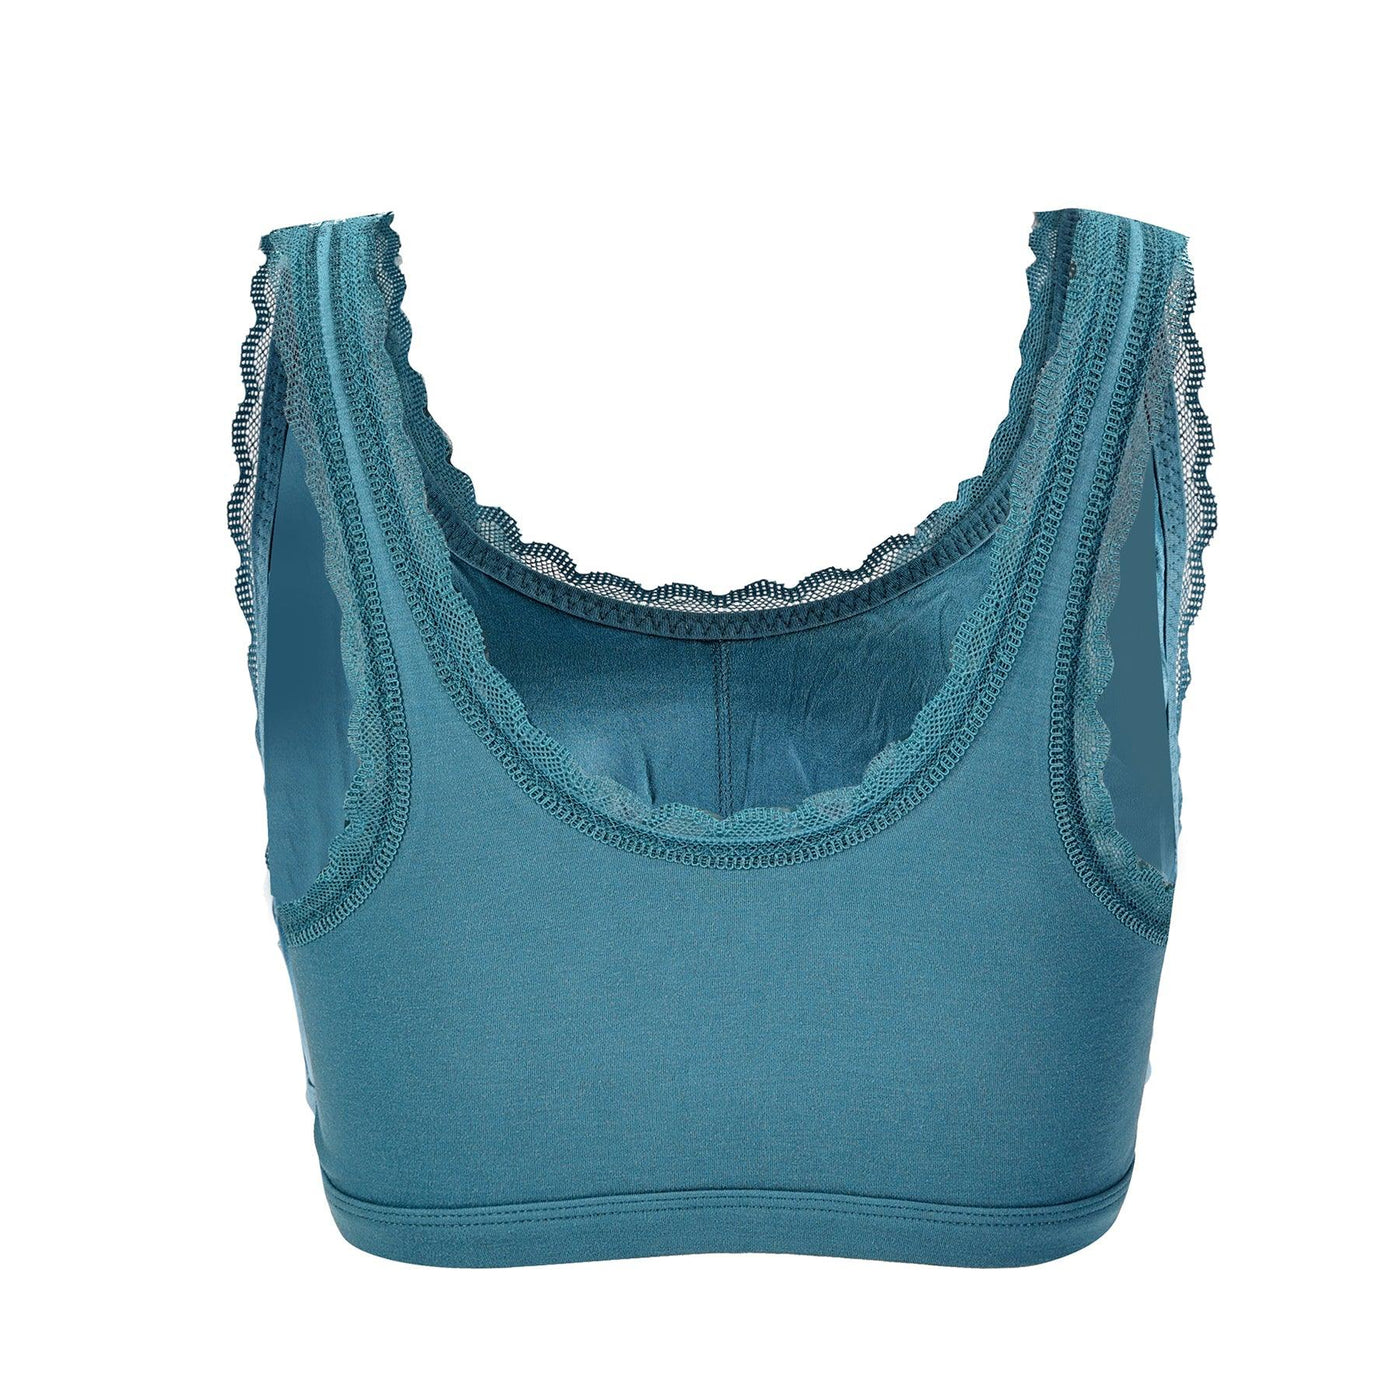 Organic Cotton Teal Bralette Top - The Indi Threads